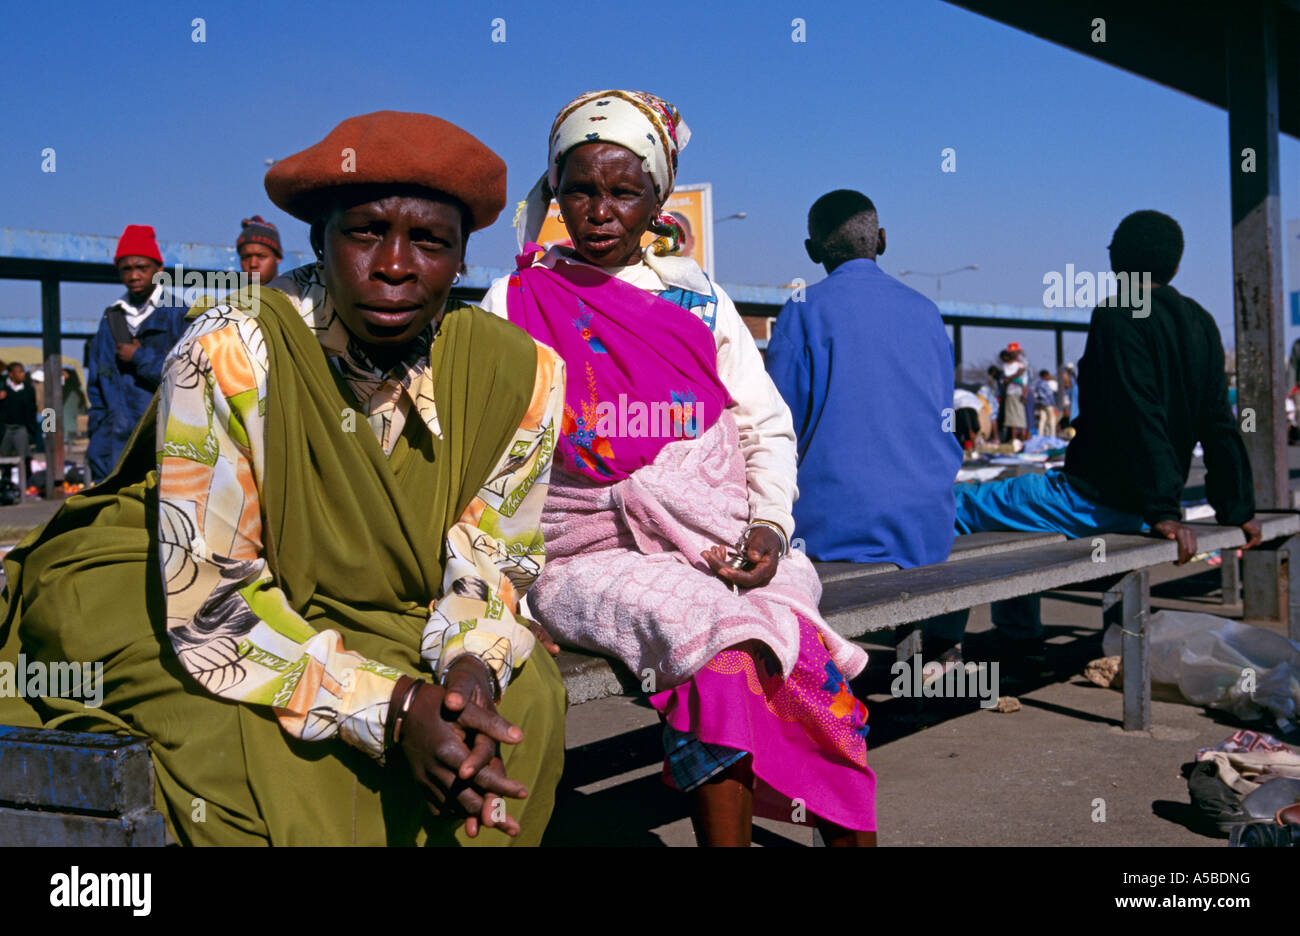 Villagers waiting on bench, Soweto, South Africa Stock Photo